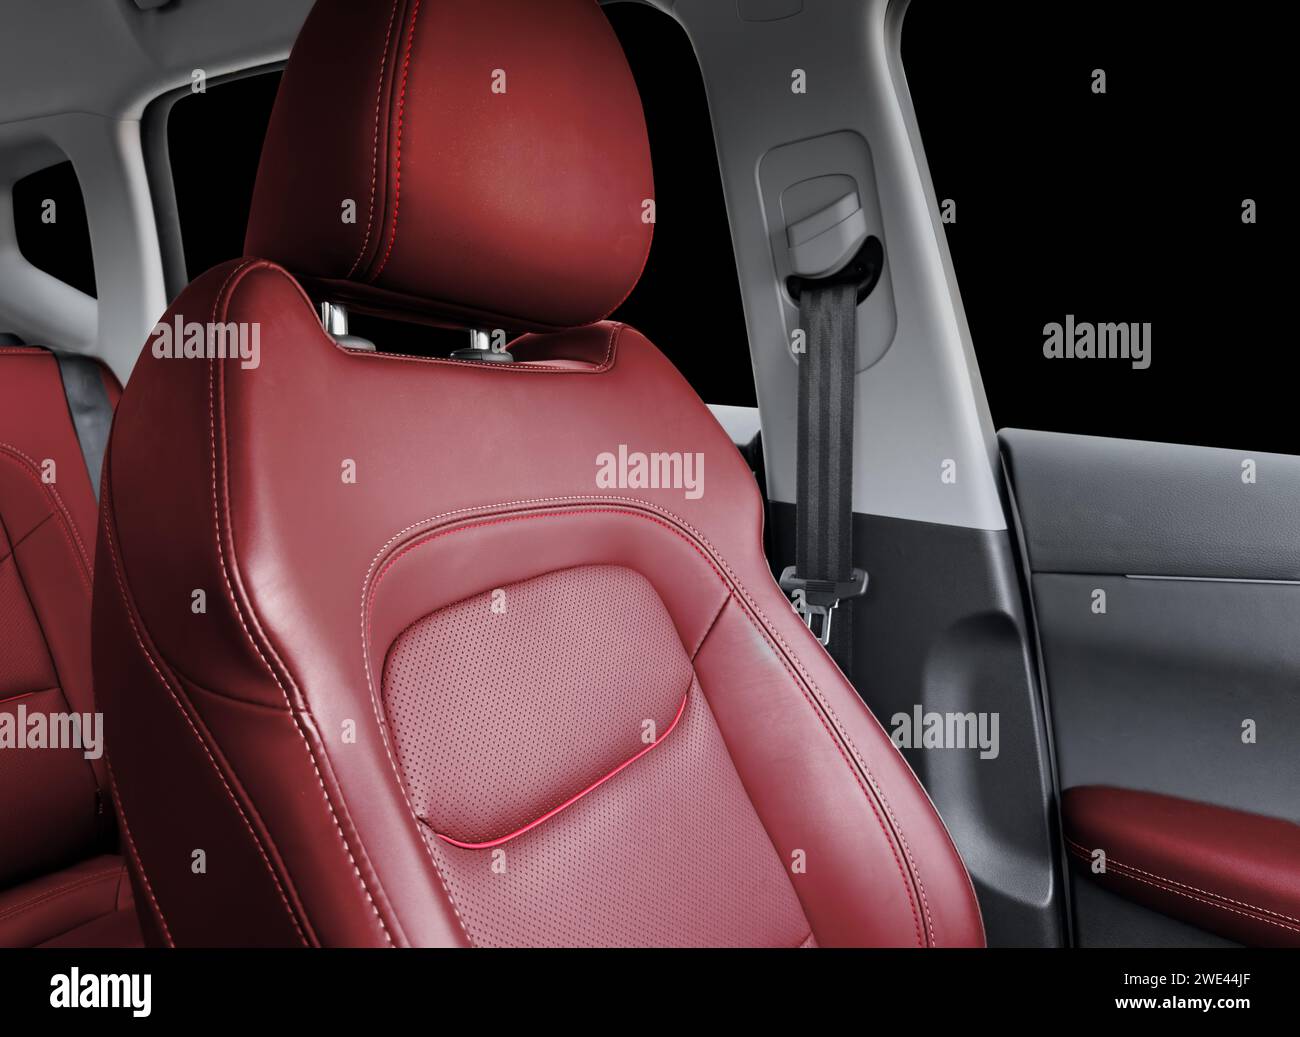 Red luxury modern car Interior. Detail of modern car interior. Part of red leather seats with red stitching in expensive car Stock Photo